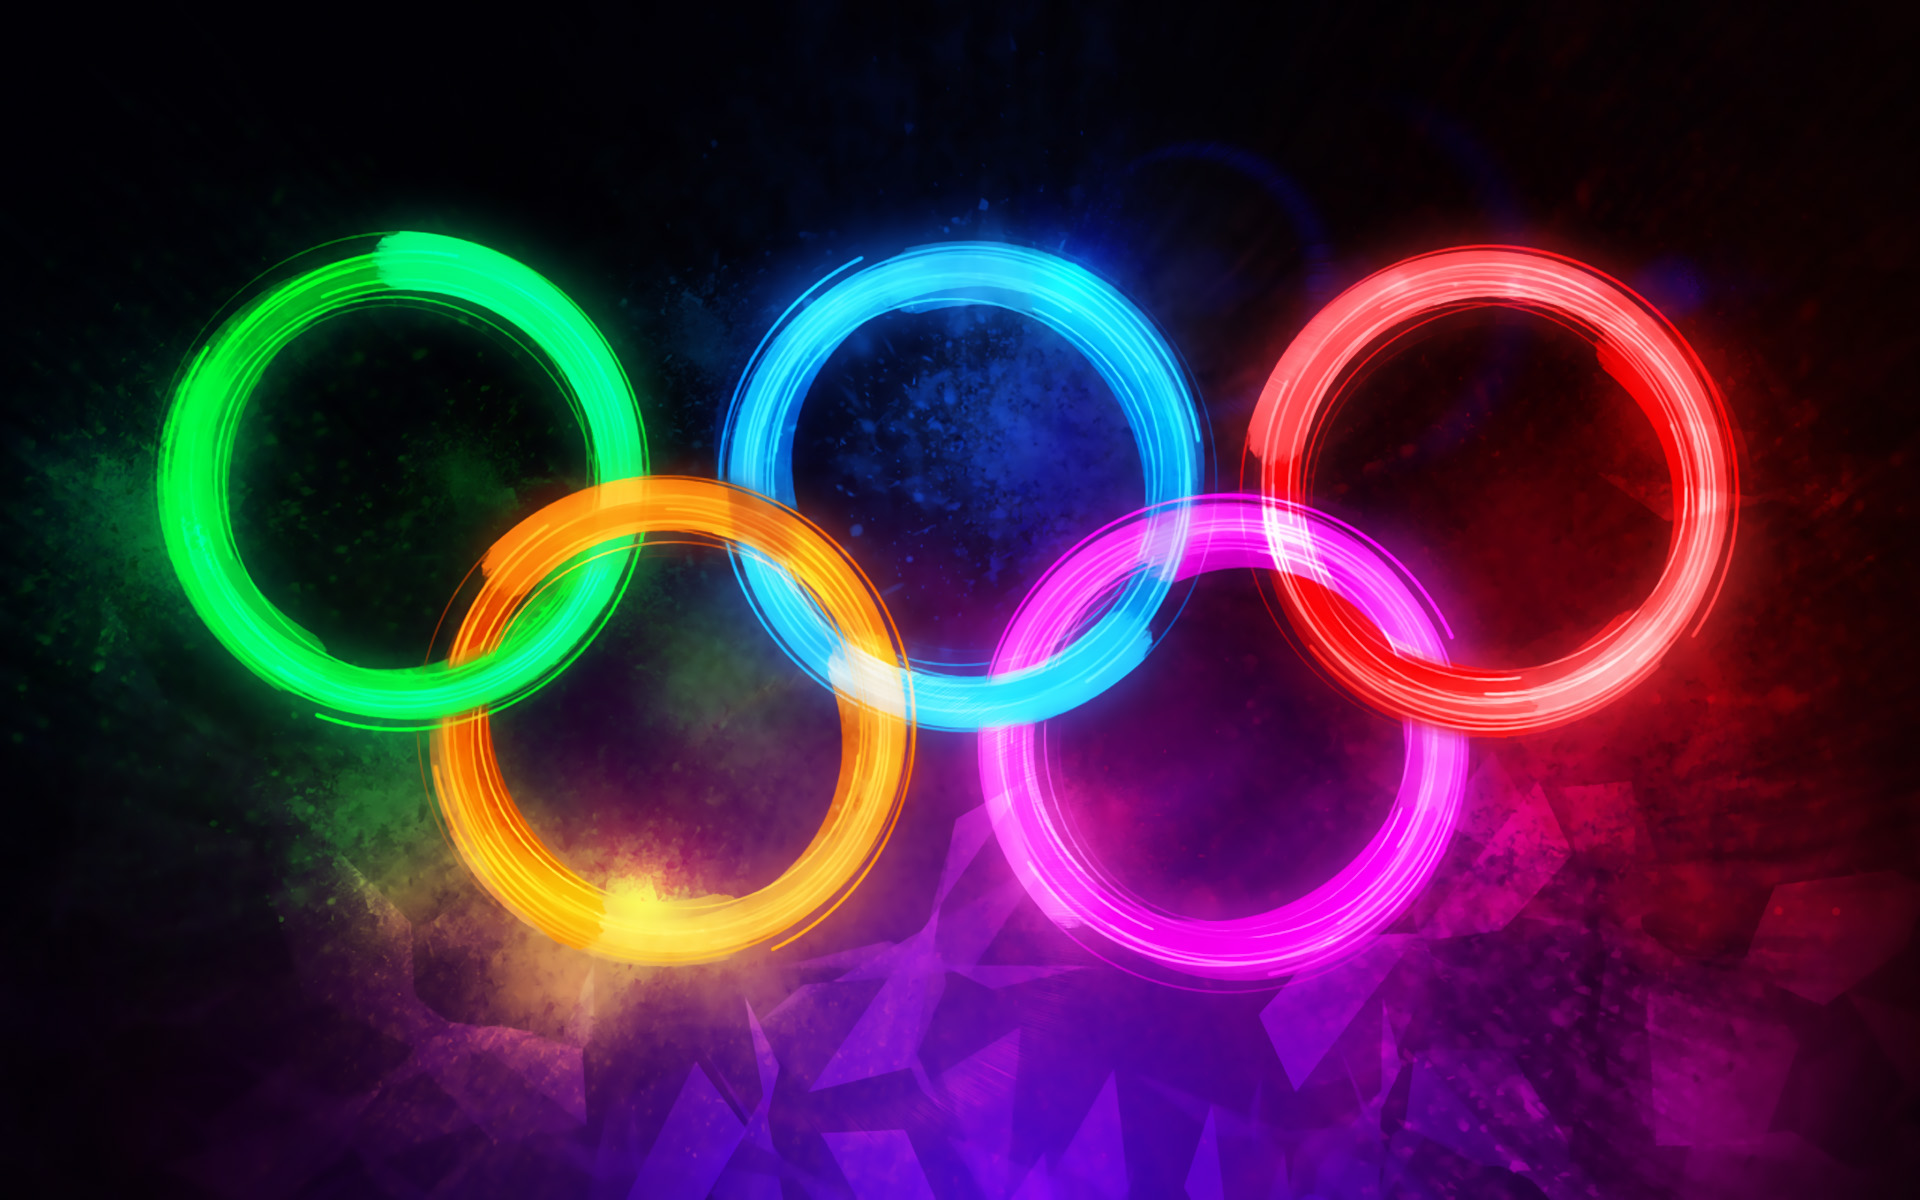 Download wallpaper Olympic rings, colorful neon rings, artwork, creative, olympic symbols, Neon Olympic Rings for desktop with resolution 1920x1200. High Quality HD picture wallpaper